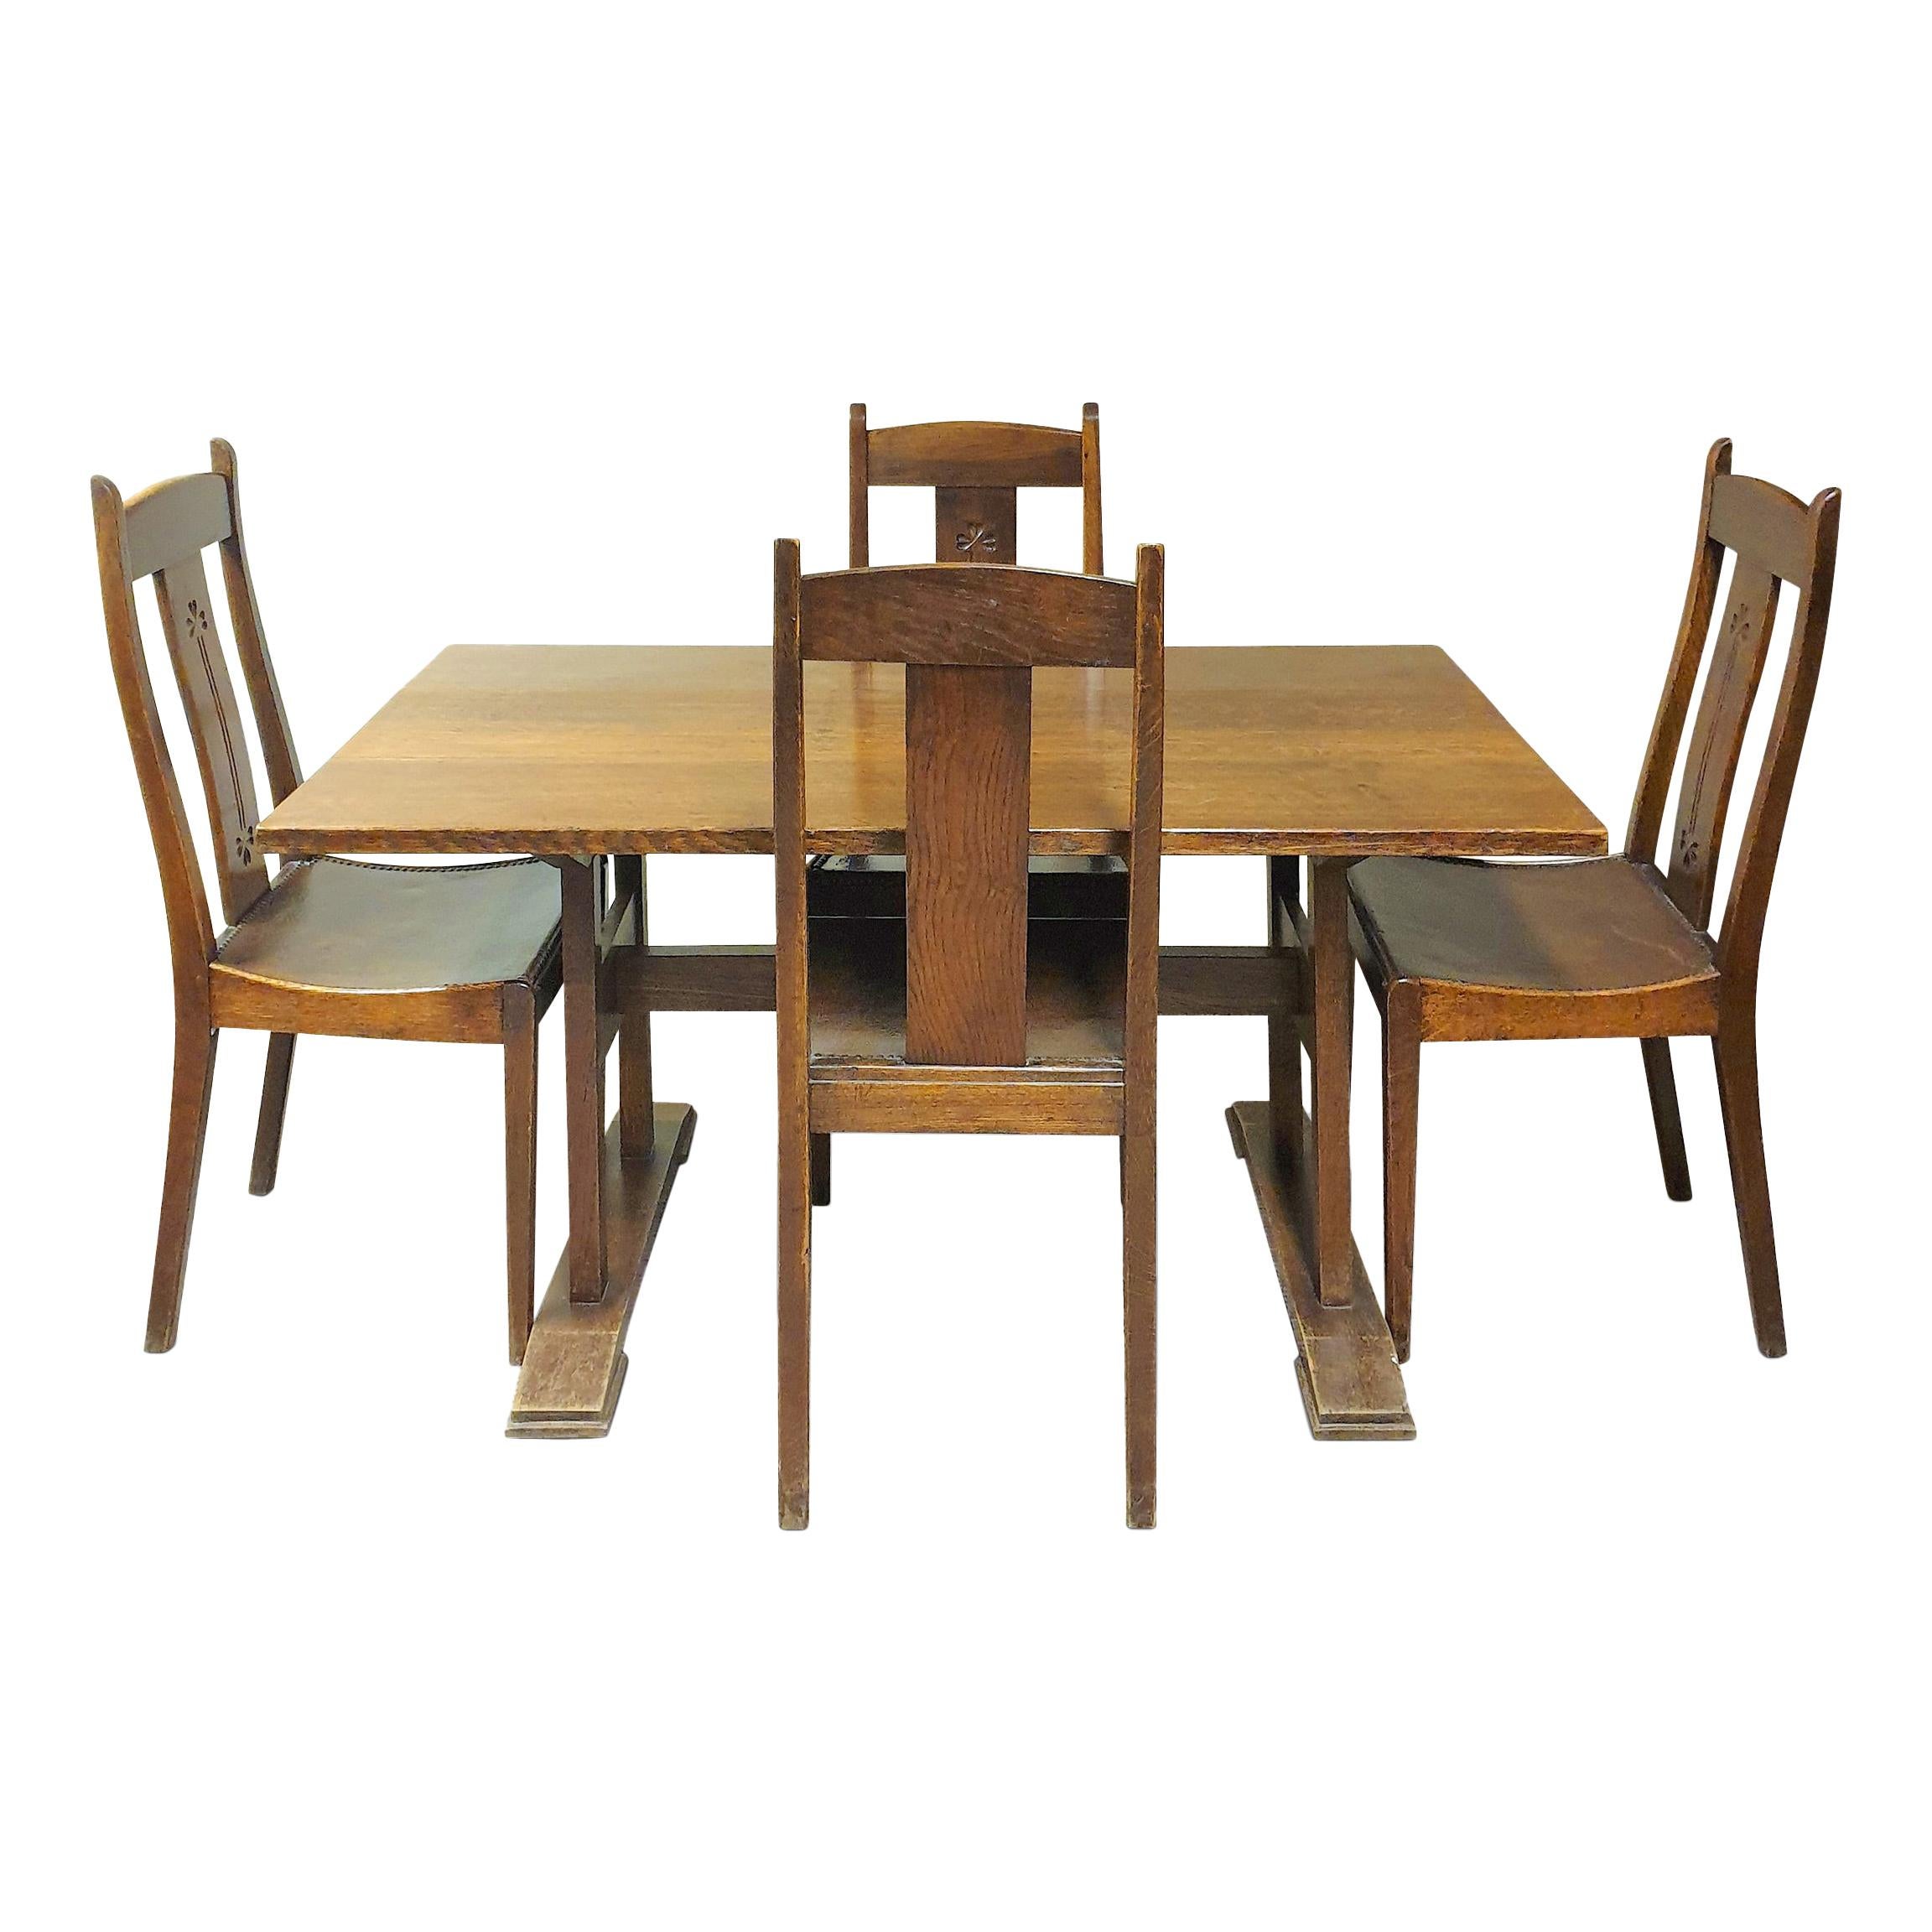 Arts & Crafts Movement Dining Set with Chairs by Arthur Simpson of Kendal